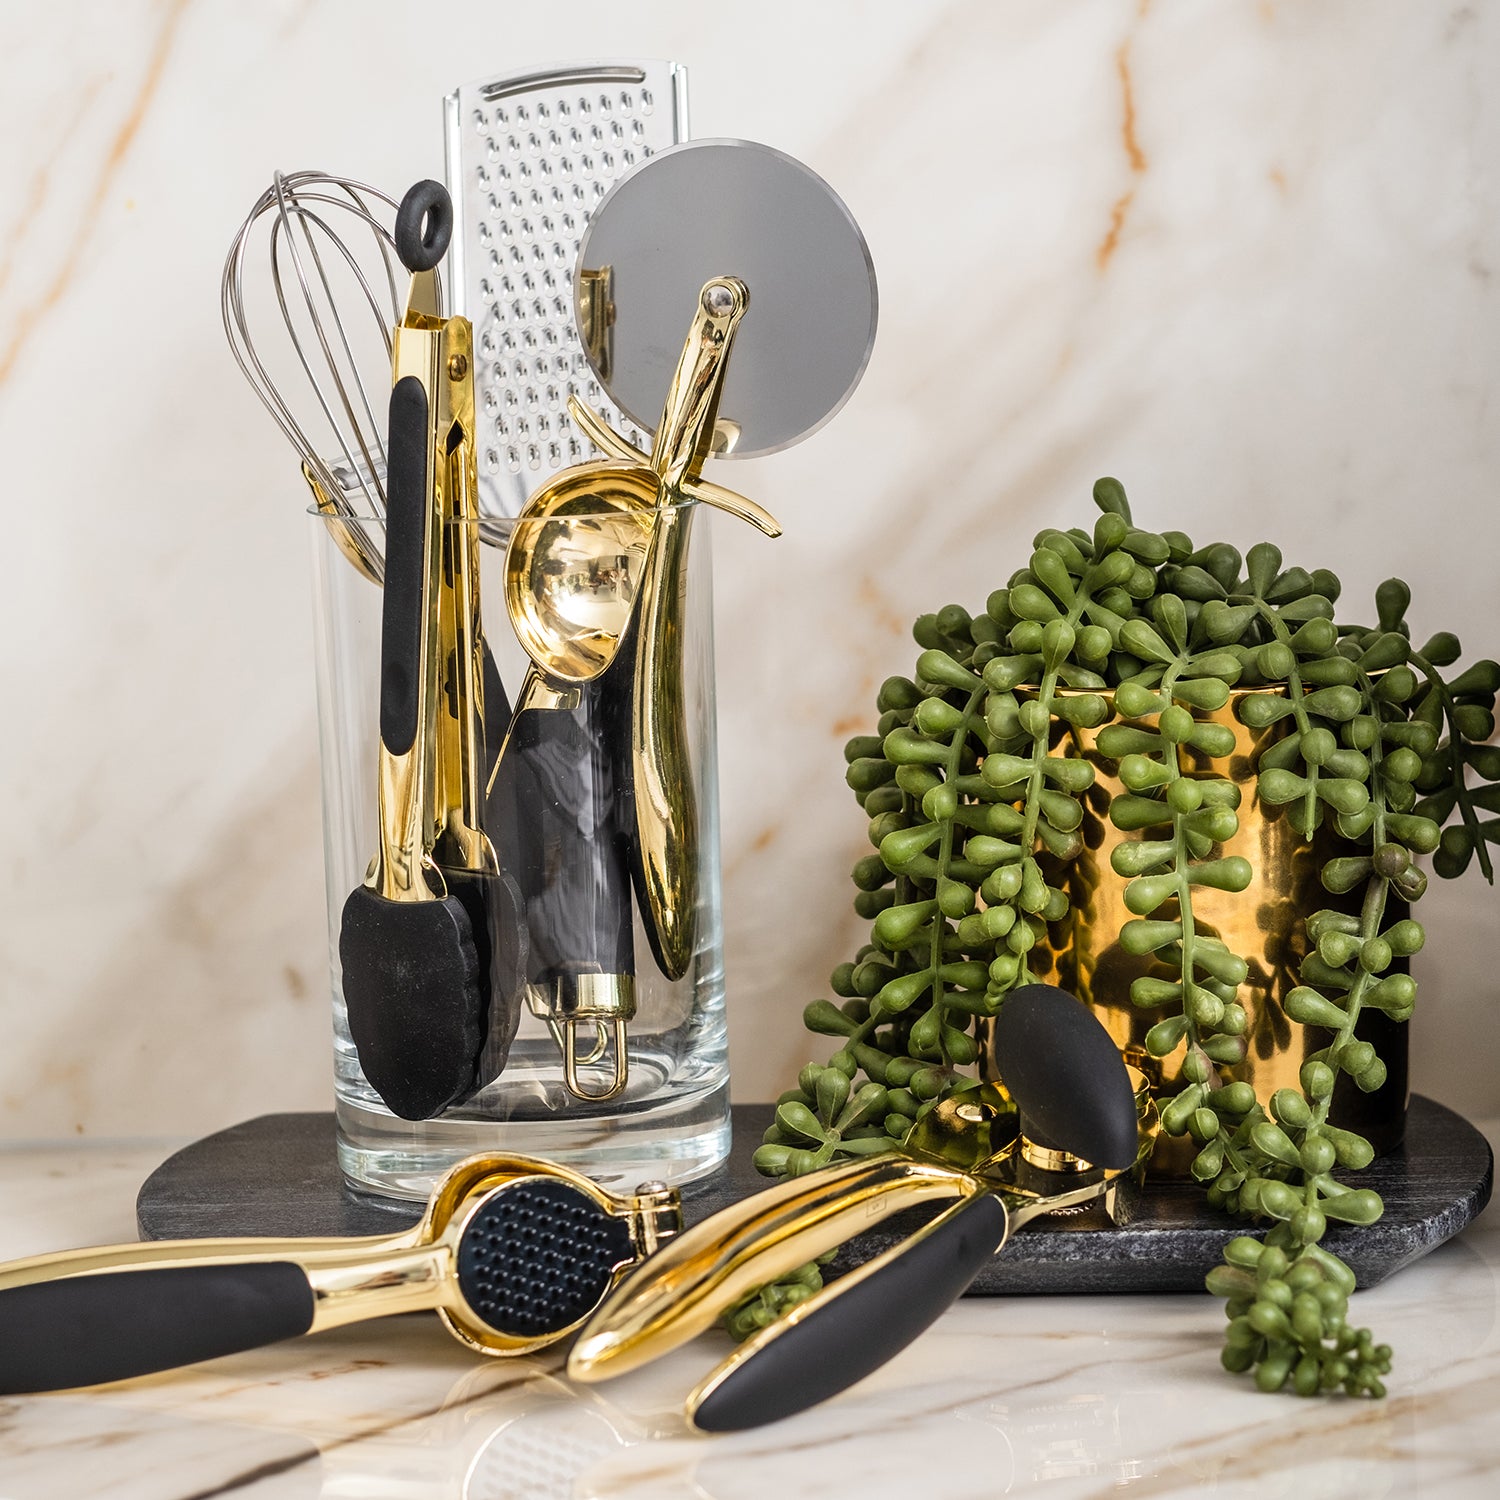 White & Gold Kitchen Tools and Gadgets - Luxe 8PC Cooking Tools